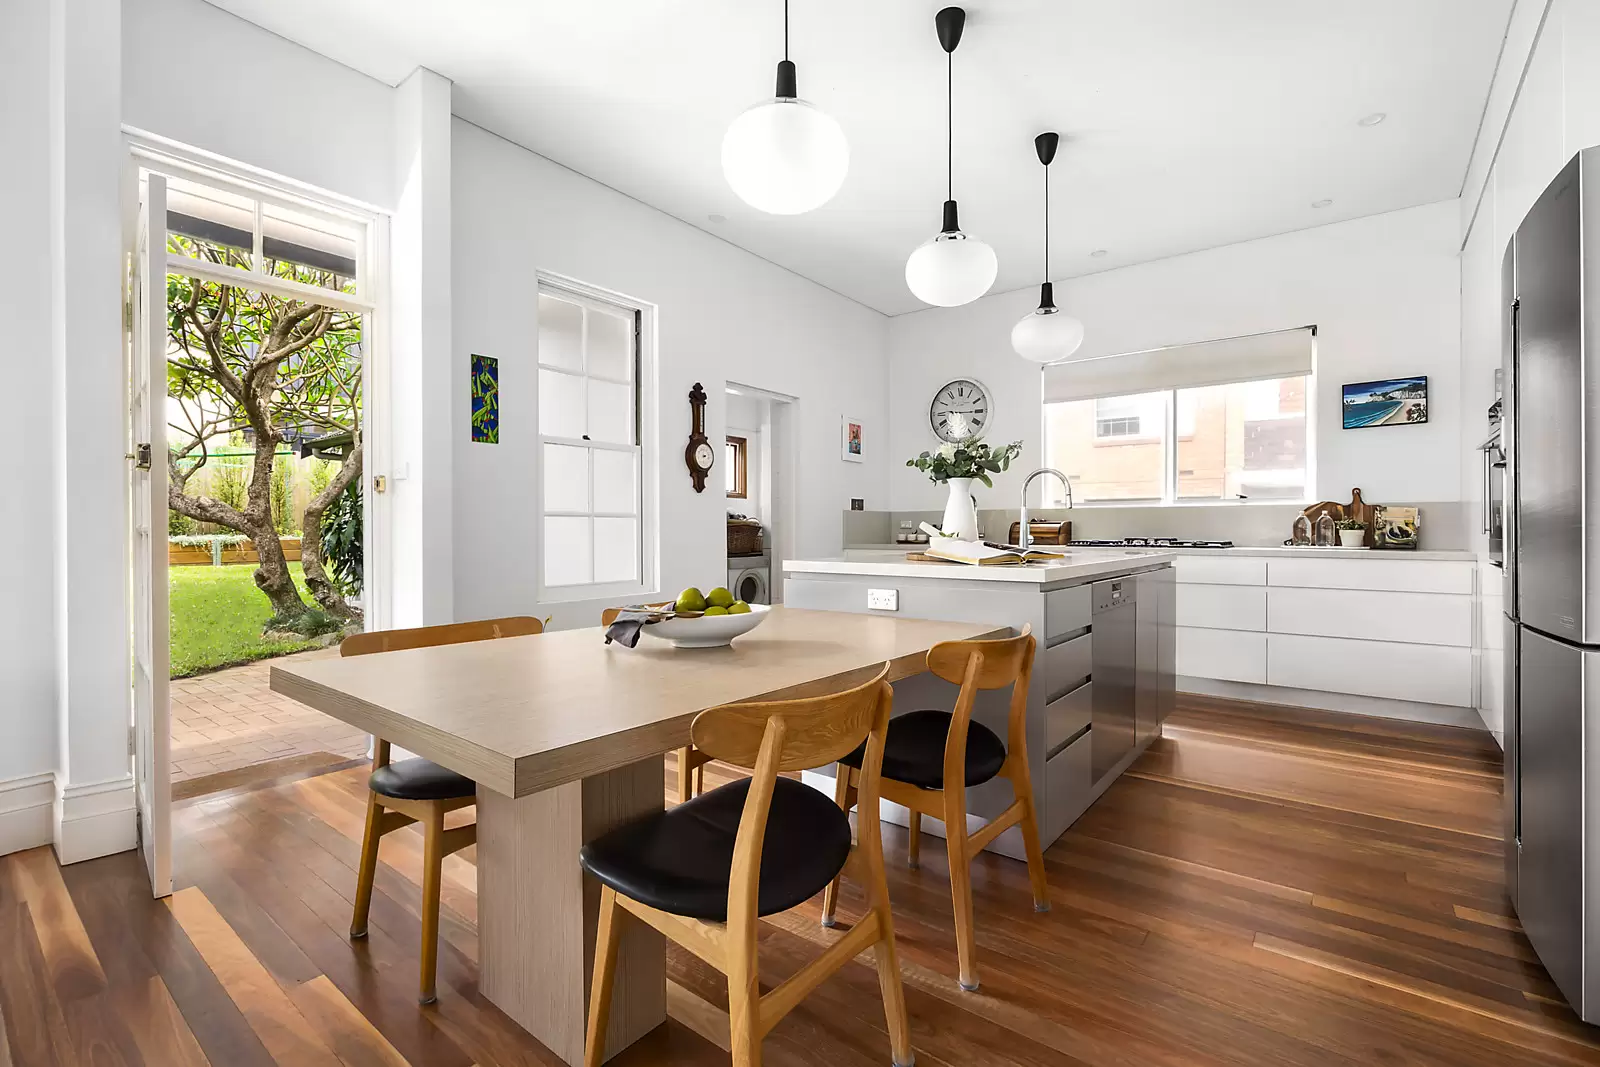 Photo #2: 27 Carr Street, Coogee - Auction by Sydney Sotheby's International Realty